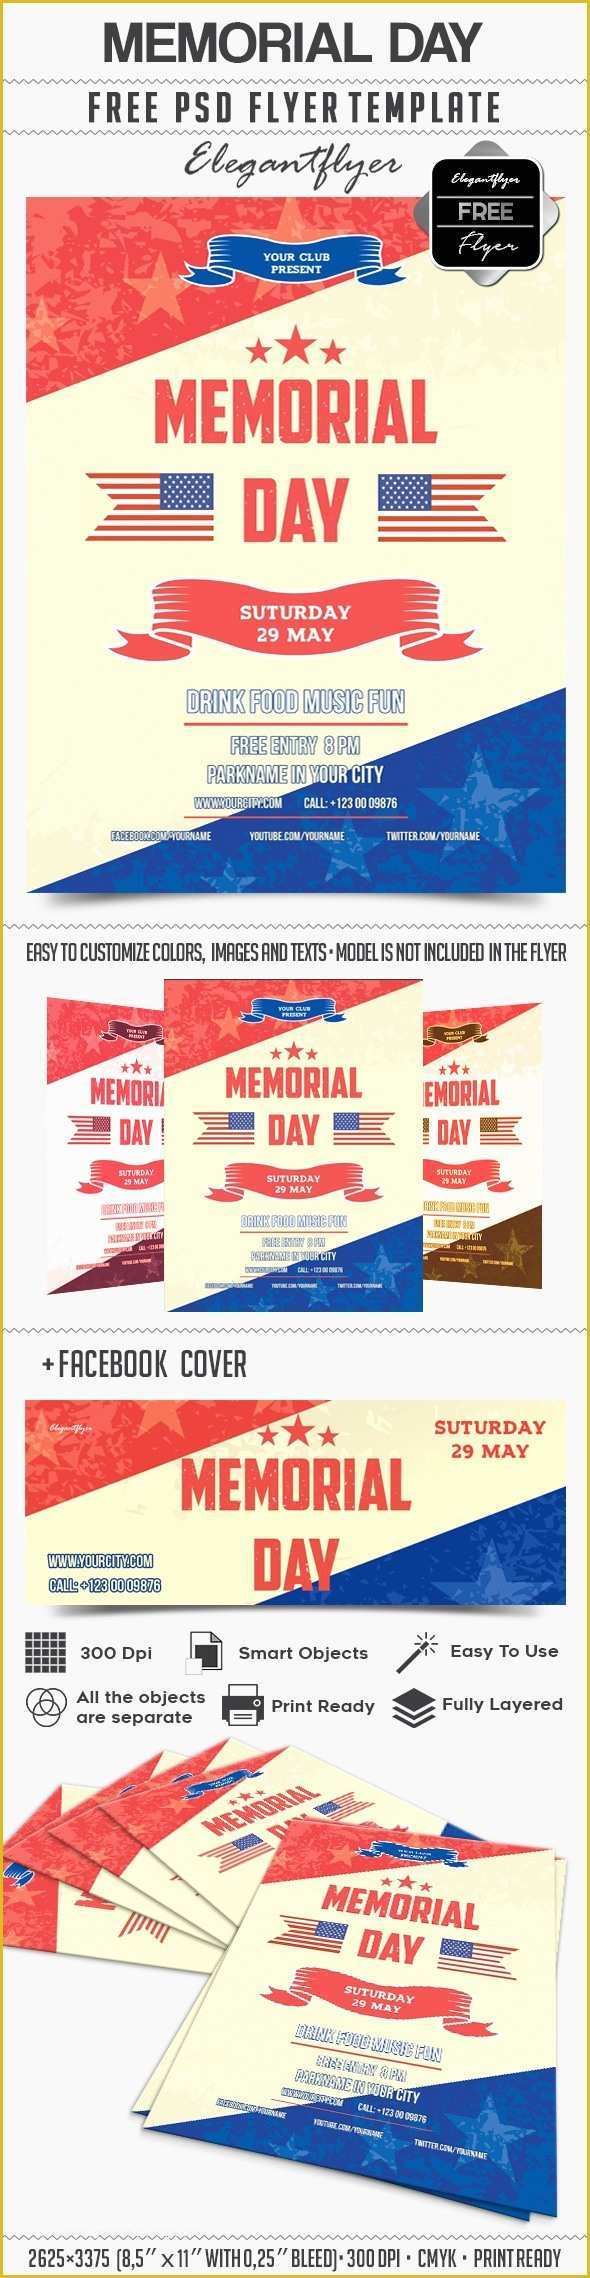 Free Funeral Flyer Template Psd Of Memorial Day V02 – Free Flyer Psd Template – by Elegantflyer